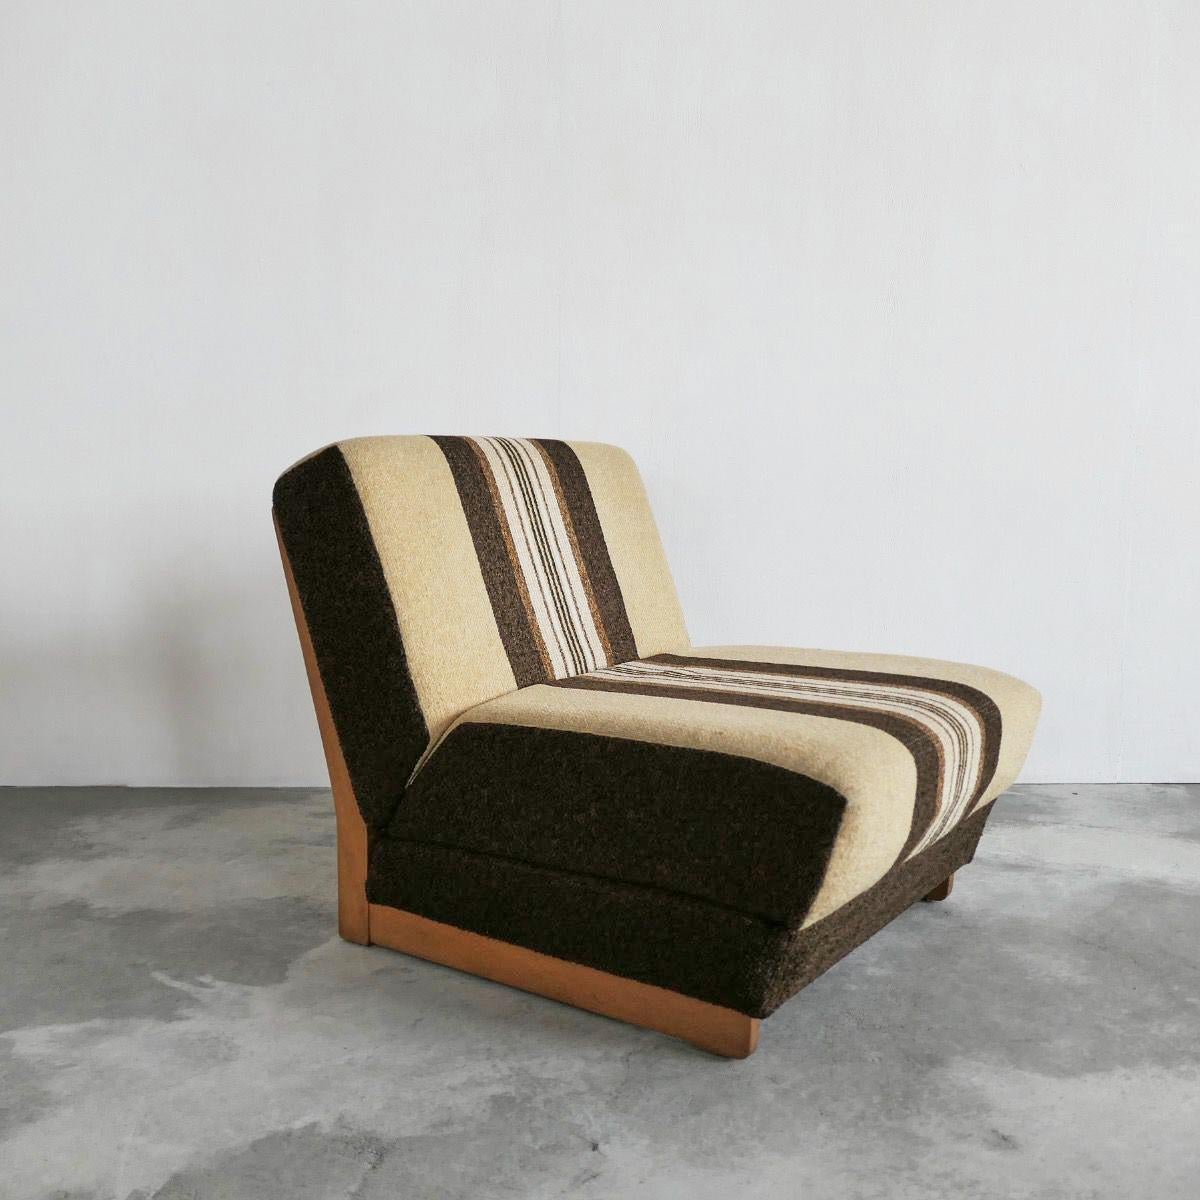 Foldable lounge chair / daybed in beech. Mid 20th century.

Unusual and fun lounge chair or chaise longue which can be folded out to a daybed / guest bed. In original striped mid-century fabric and with a very simple but elegant frame in beech.